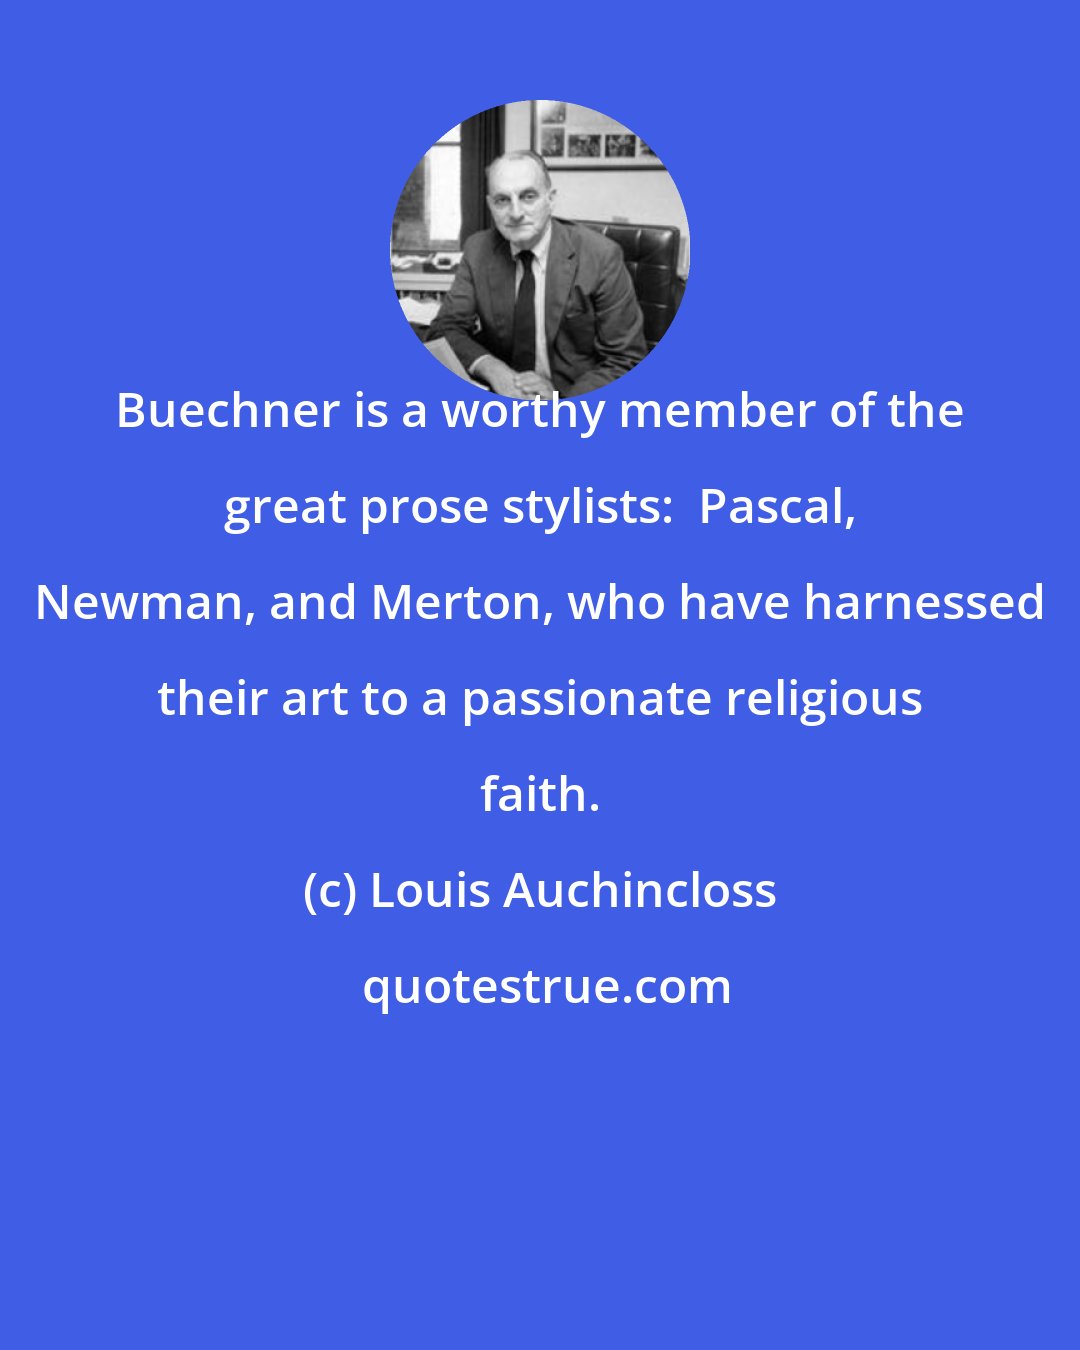 Louis Auchincloss: Buechner is a worthy member of the great prose stylists:  Pascal, Newman, and Merton, who have harnessed their art to a passionate religious faith.